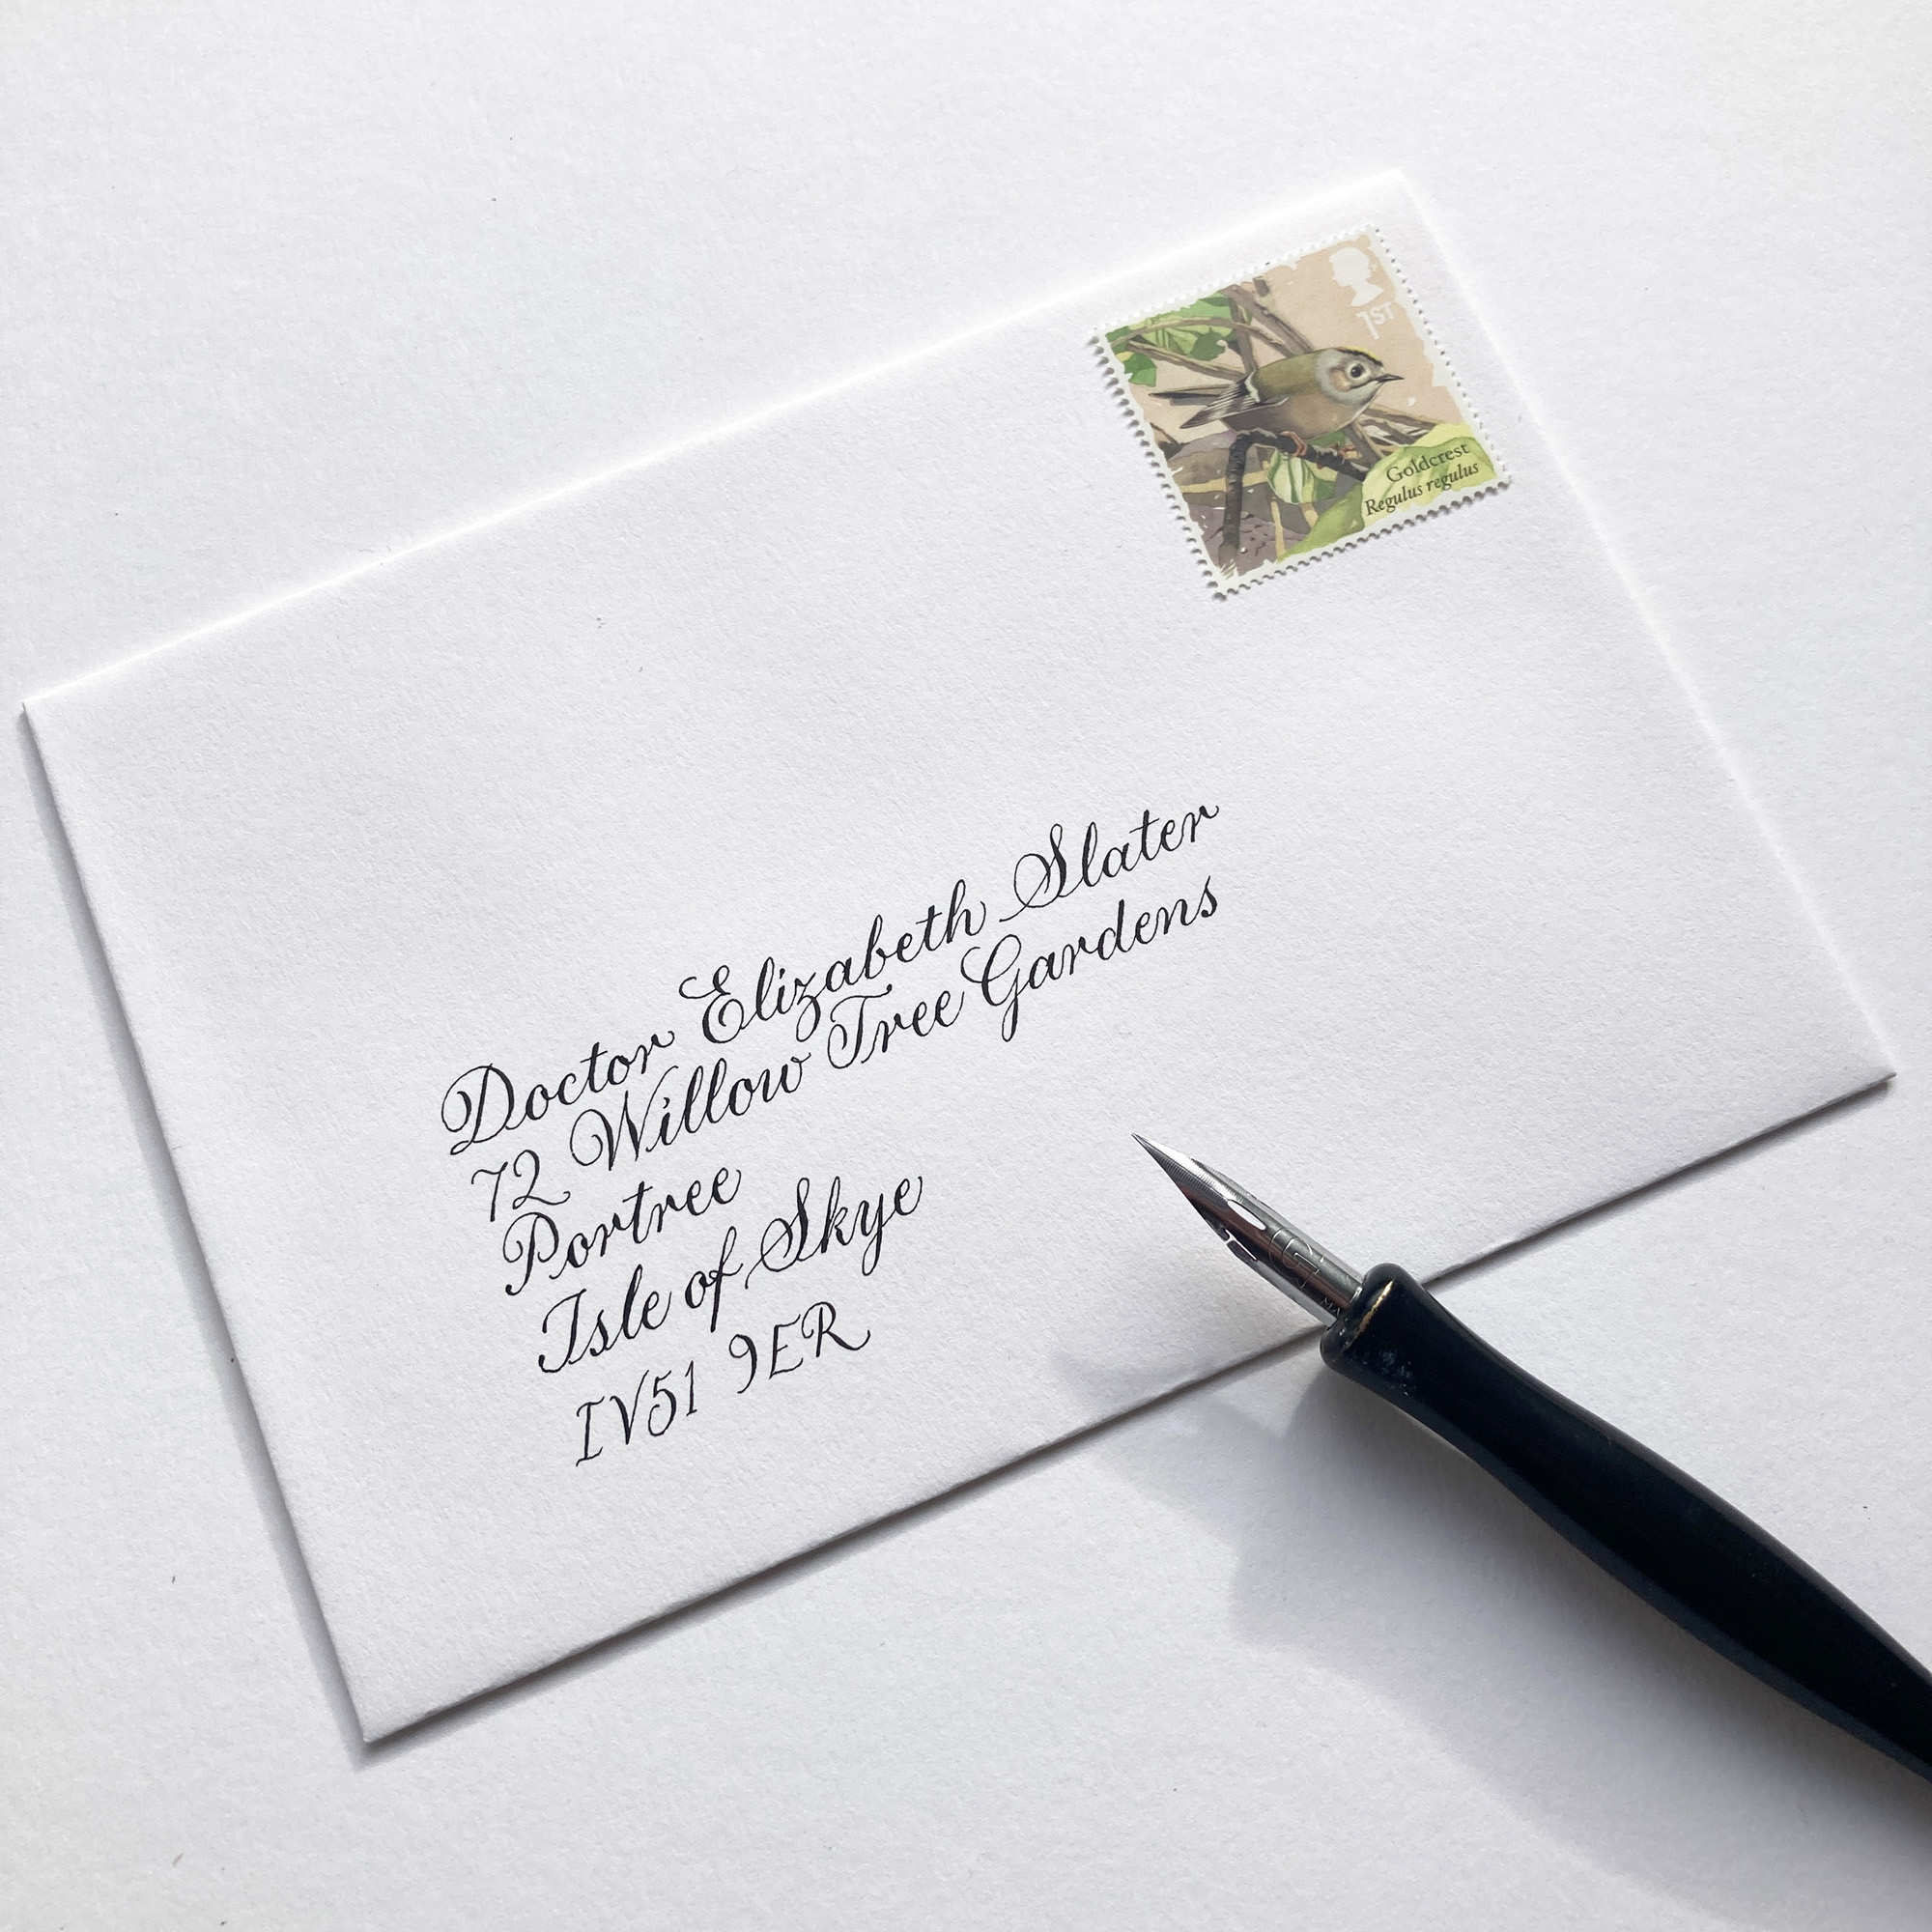 Copperplate style for modern calligraphy envelope addressing